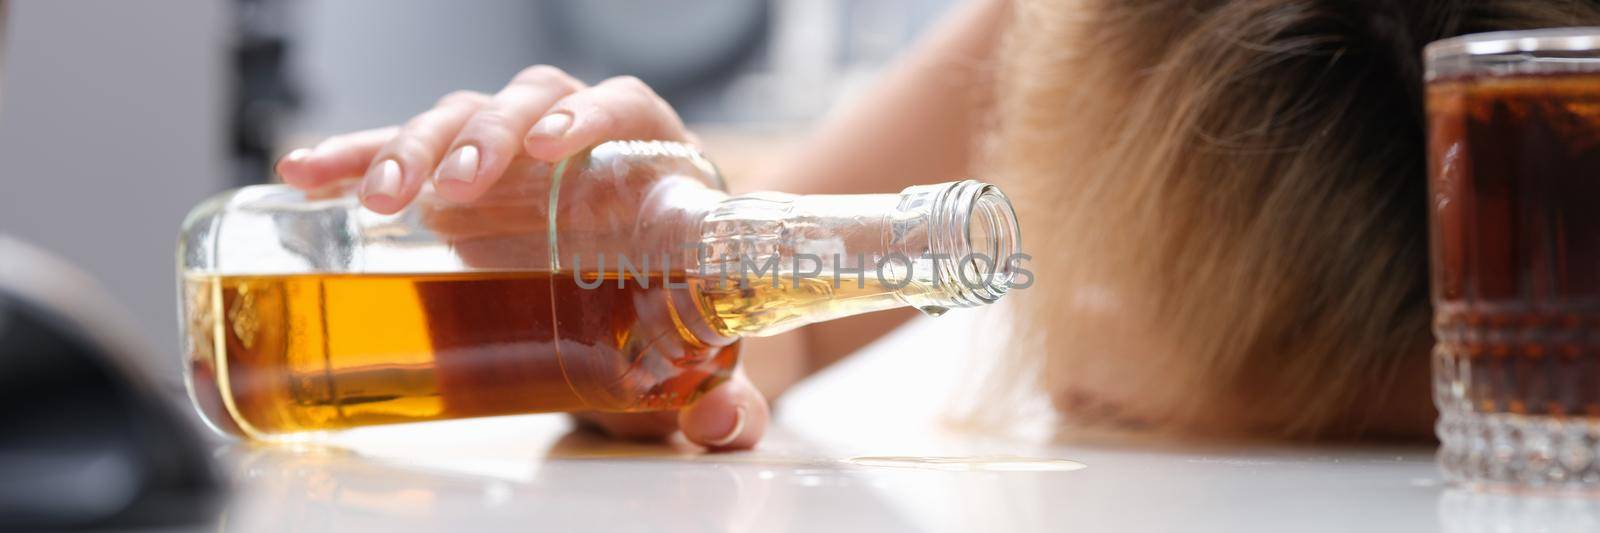 Woman sleeping at table with bottle of alcohol in her hands closeup. Alcohol addiction in women concept